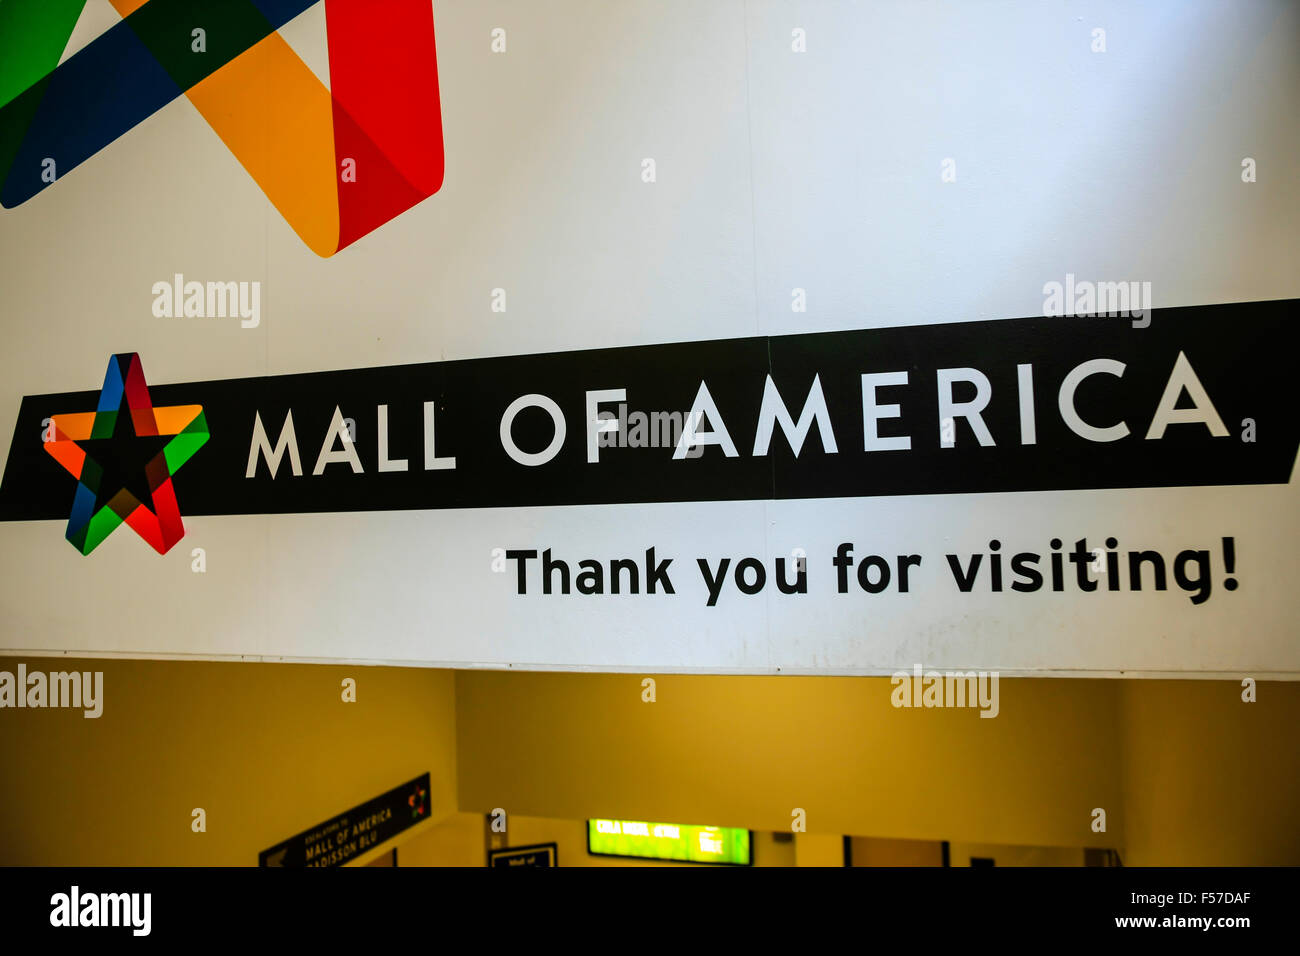 Mall of America - the biggest shopping mall in America situated in Minneapolis MN Stock Photo